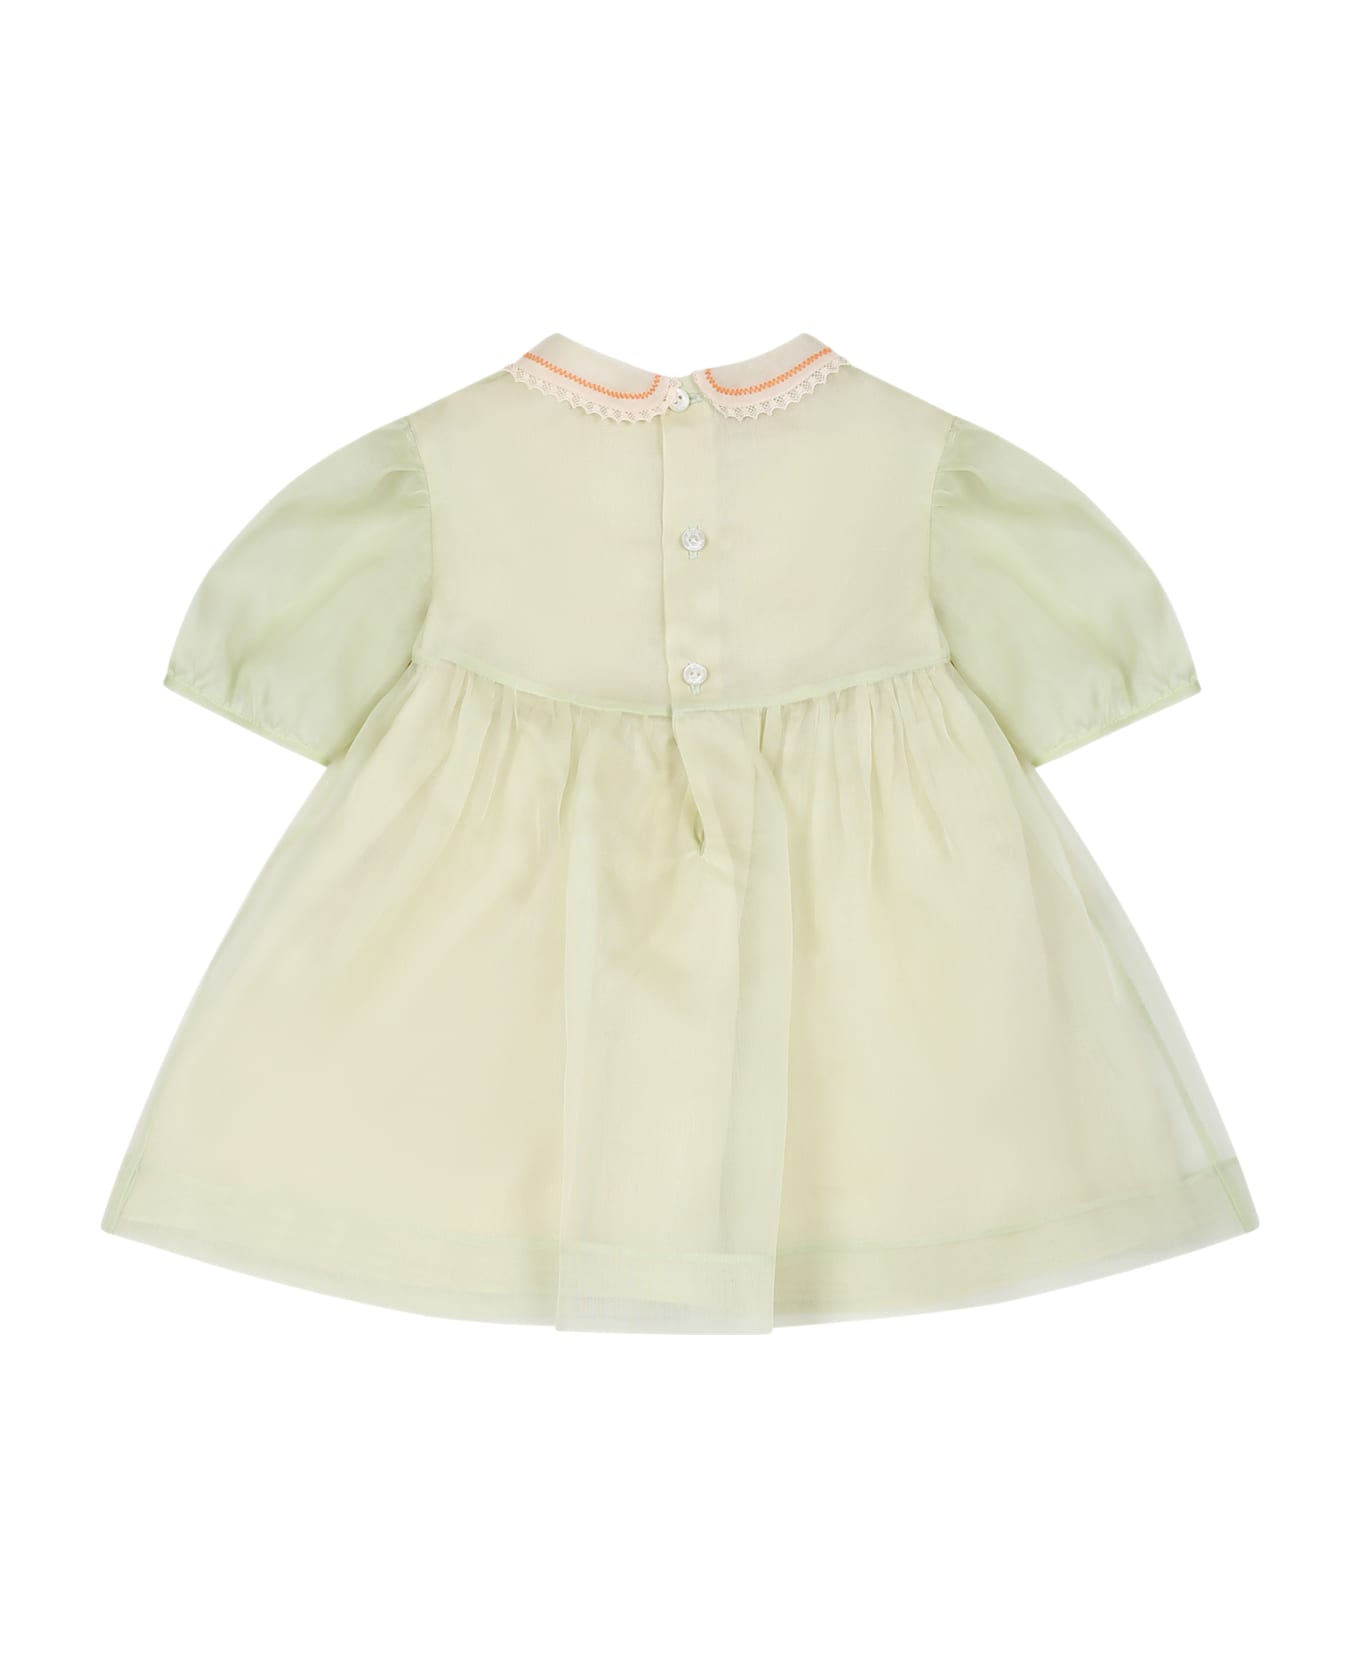 Gucci Green Dress For Baby Girl With Flower And Interlocking Gg - Green